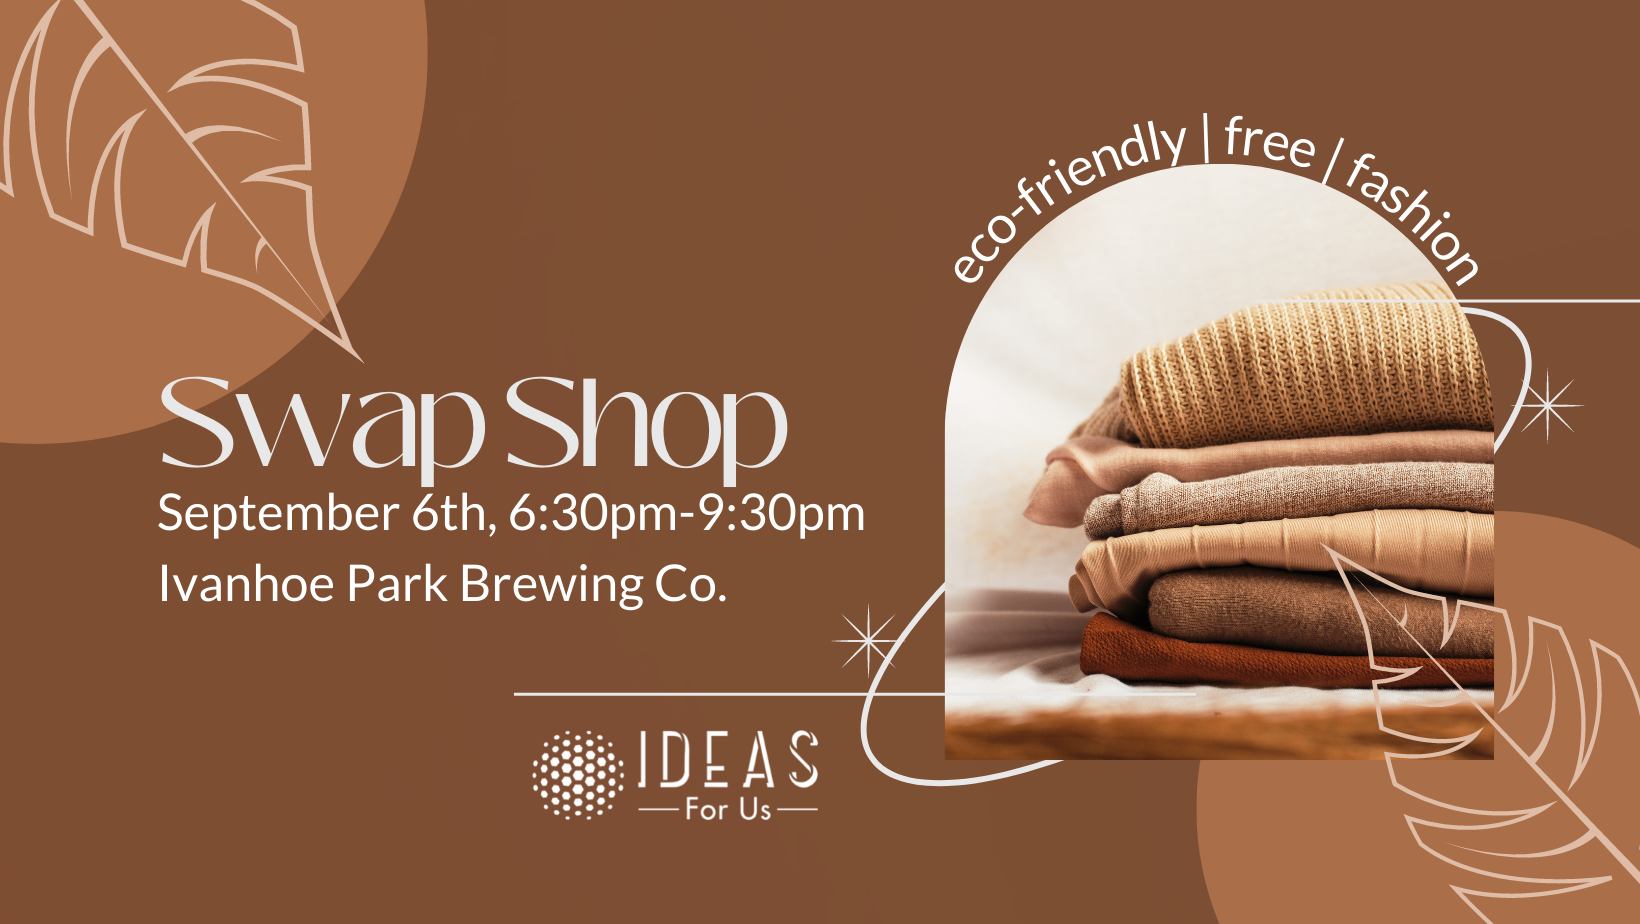 Orlando Swap Shop at Ivanhoe Park Brewing Company | IDEAS For Us